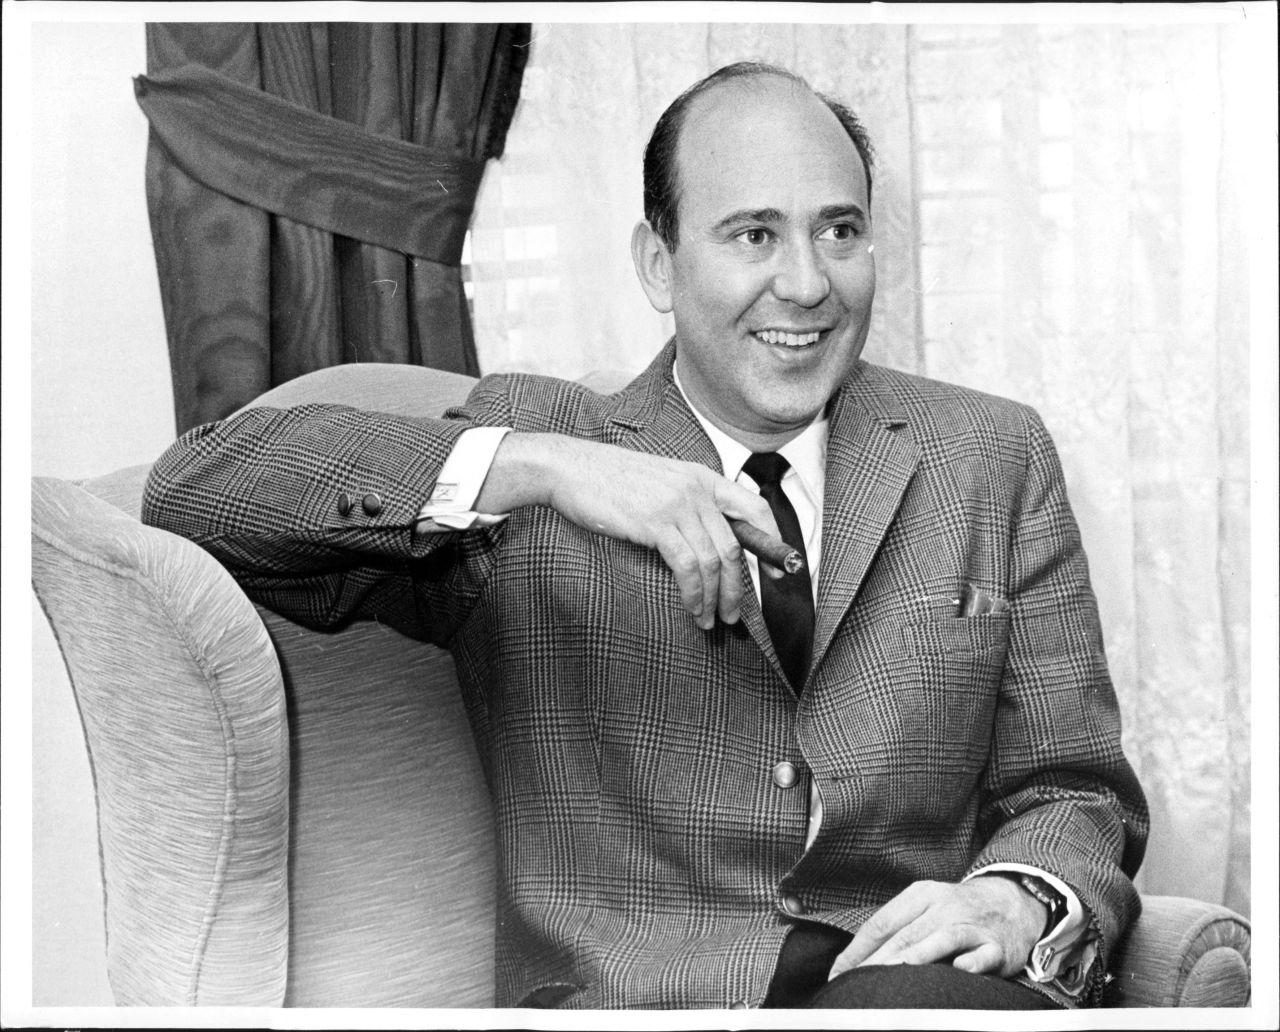 <a href="https://www.cnn.com/2020/06/30/entertainment/car-reiner-obit/index.html" target="_blank">Carl Reiner,</a> the writer, actor, director and producer whose many decades' worth of credits — including "The Dick Van Dyke Show" and "The 2000-Year-Old Man" — showcased a ready wit and a generous spirit, died June 29. He was 98.